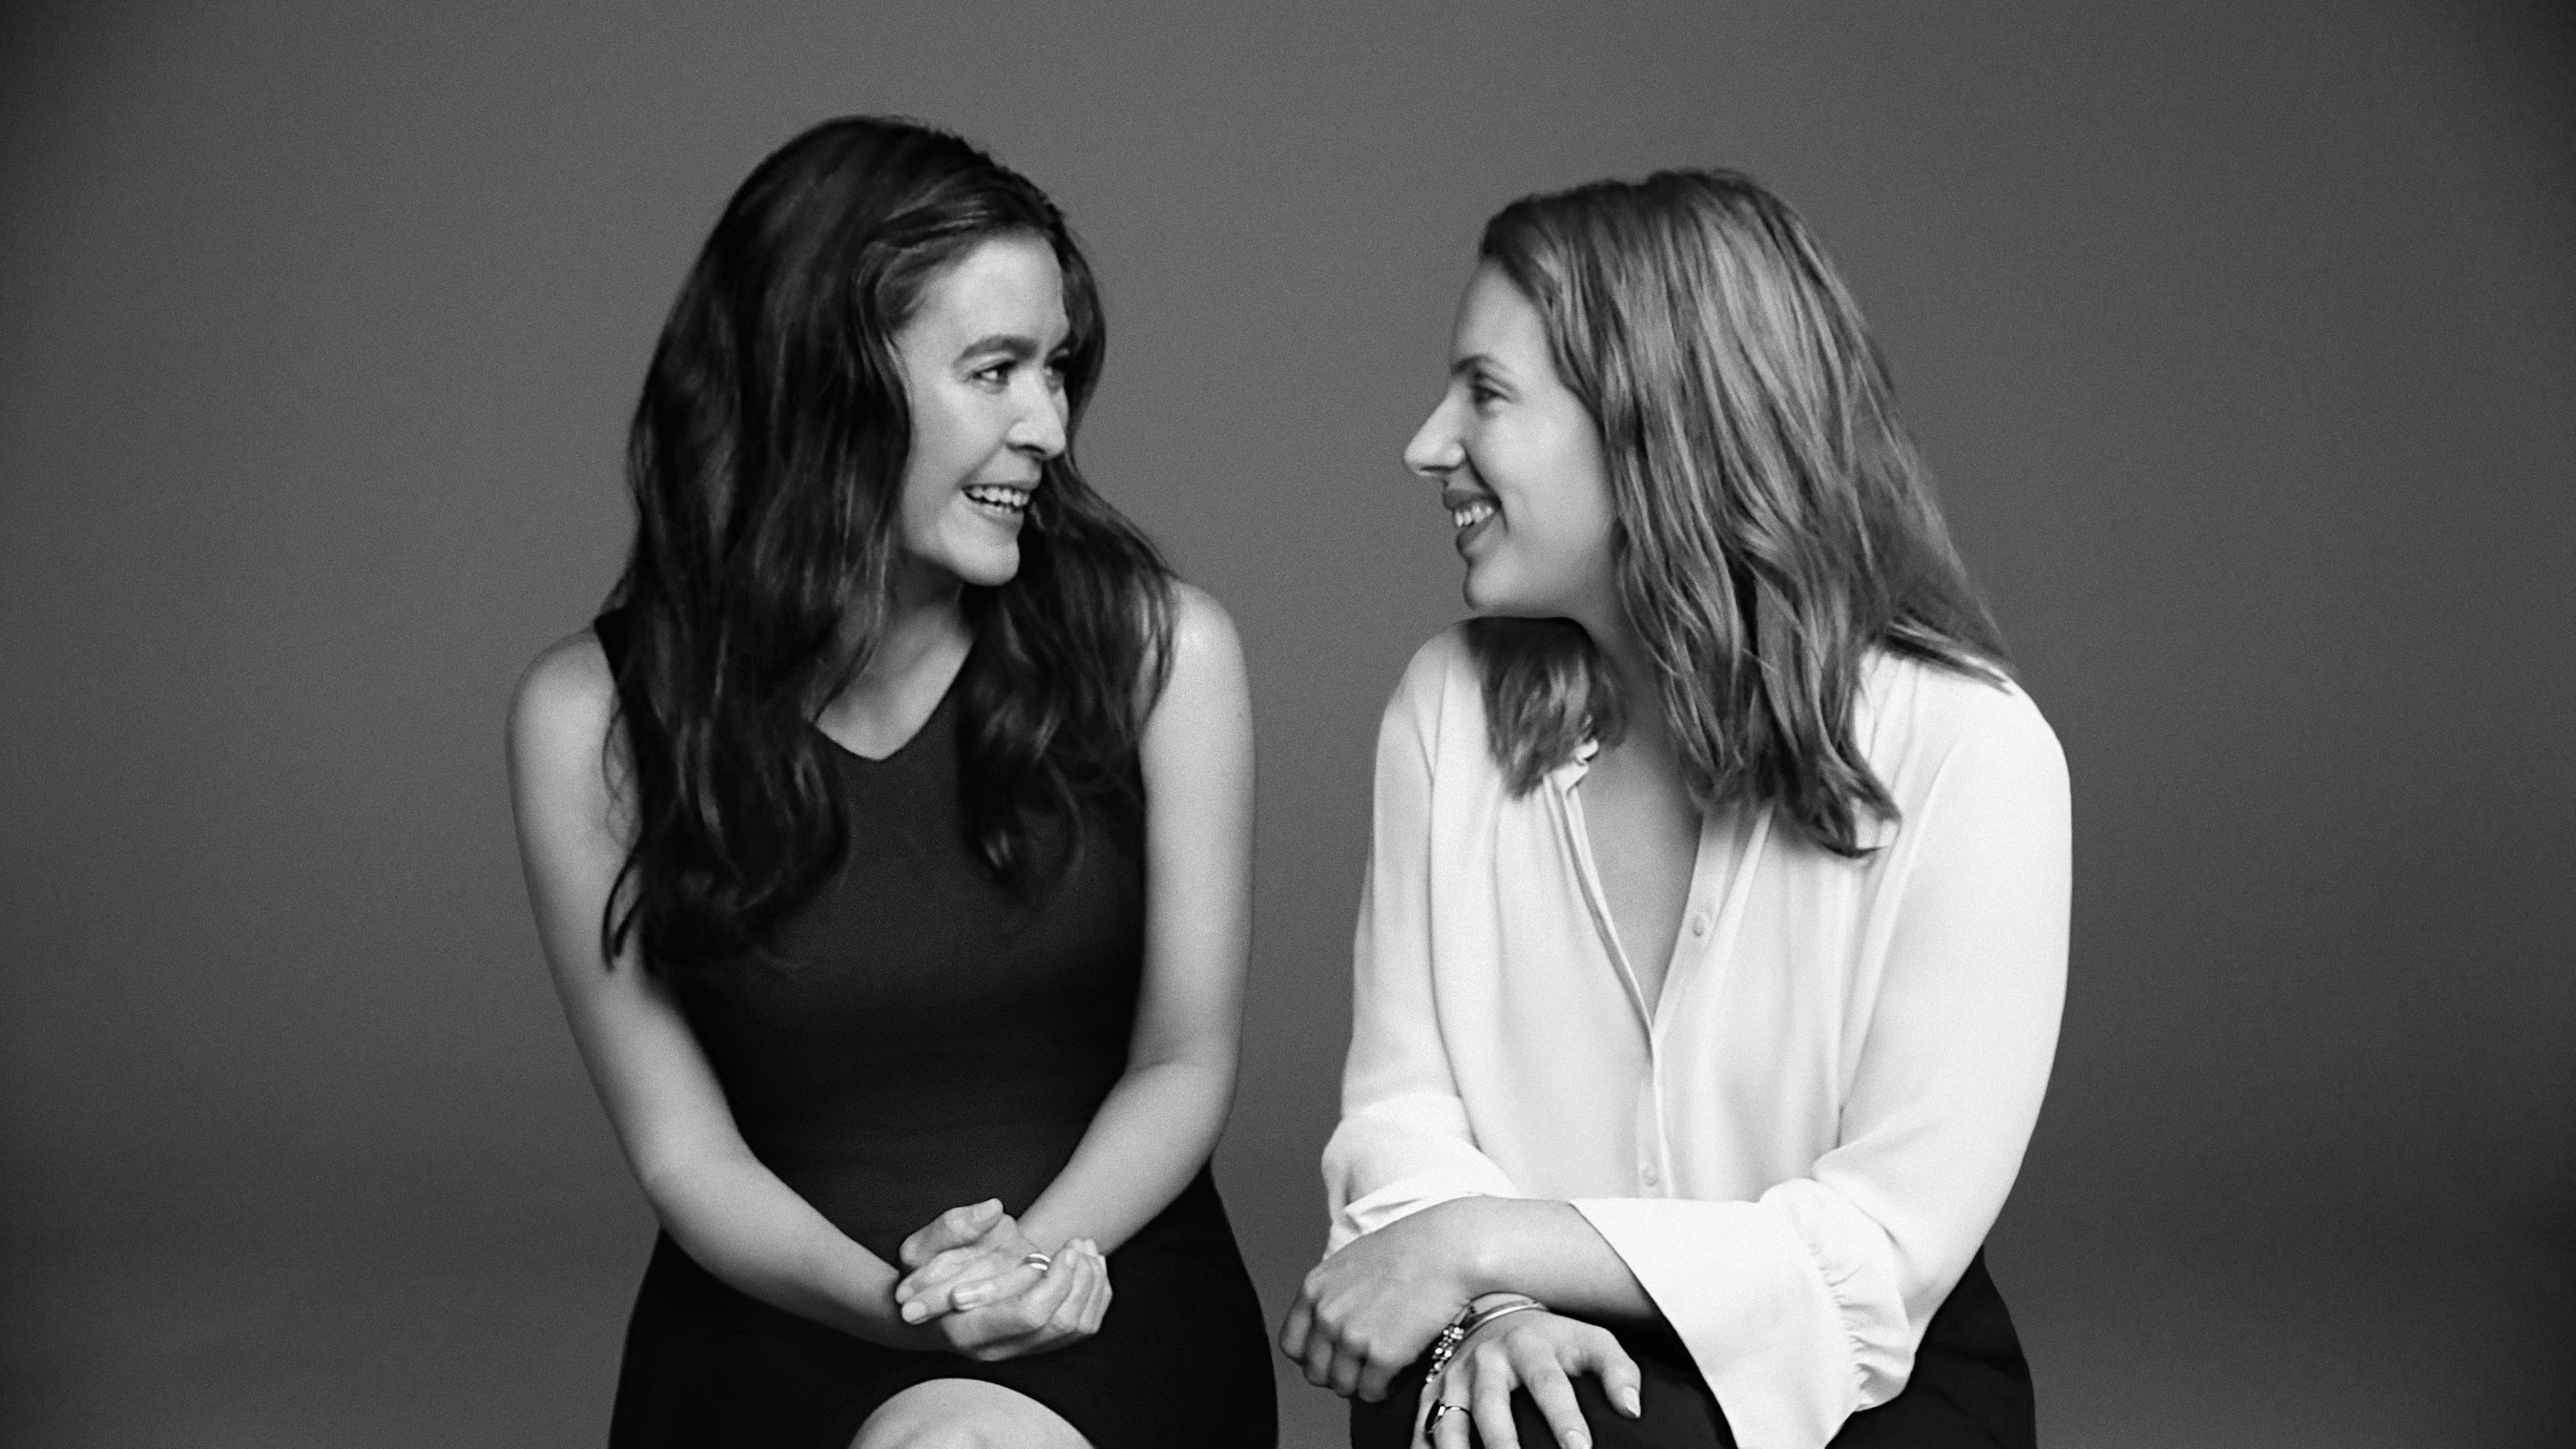 Ann Taylor partners with Broadway's Waitress, star Jessie Mueller and director Diane Paulus to honor inspiring women and their creative collaboration